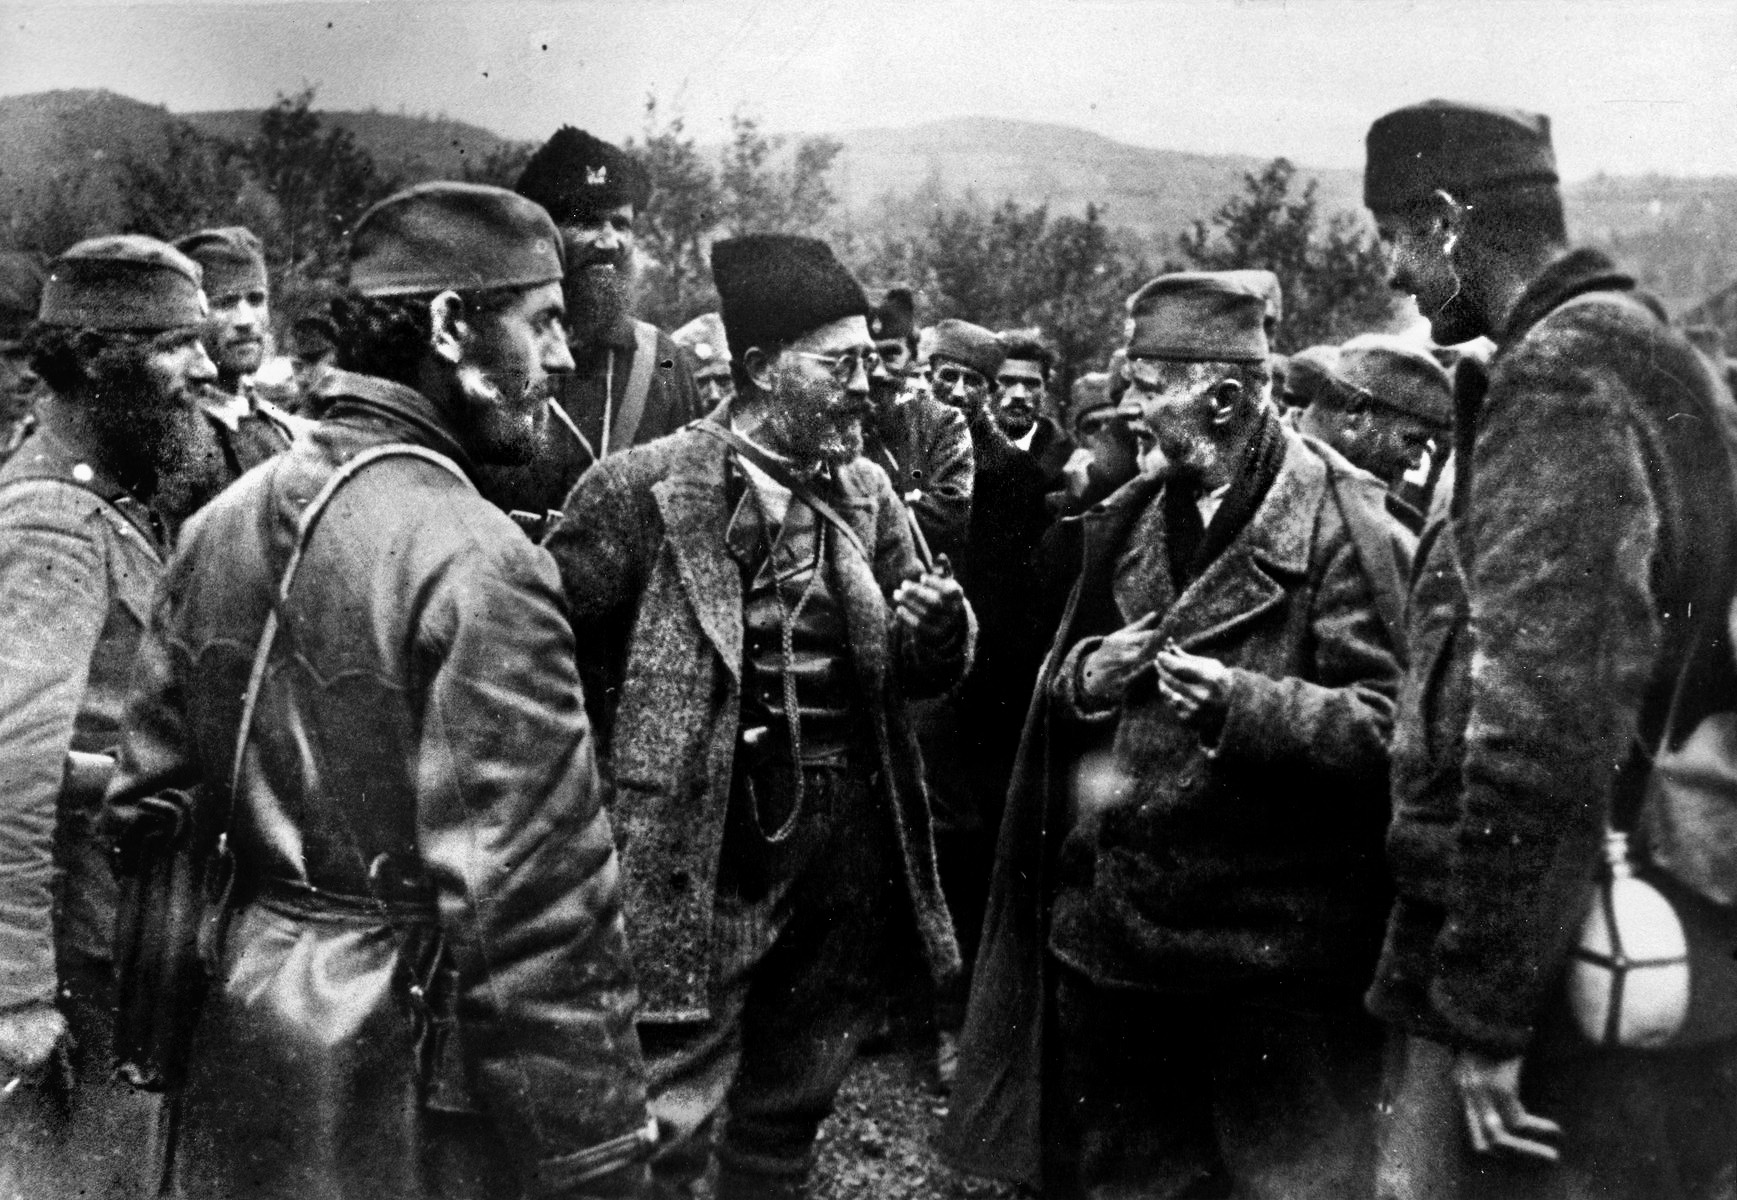 Chetnik leader Drazha Mihailovich talks with a group of his senior commanders. By the end of World War II, the Chetniks’ ranks had been seriously depleted, with only a handful holding out in a mountainous area. They were eventually captured by Tito’s communist security troops.